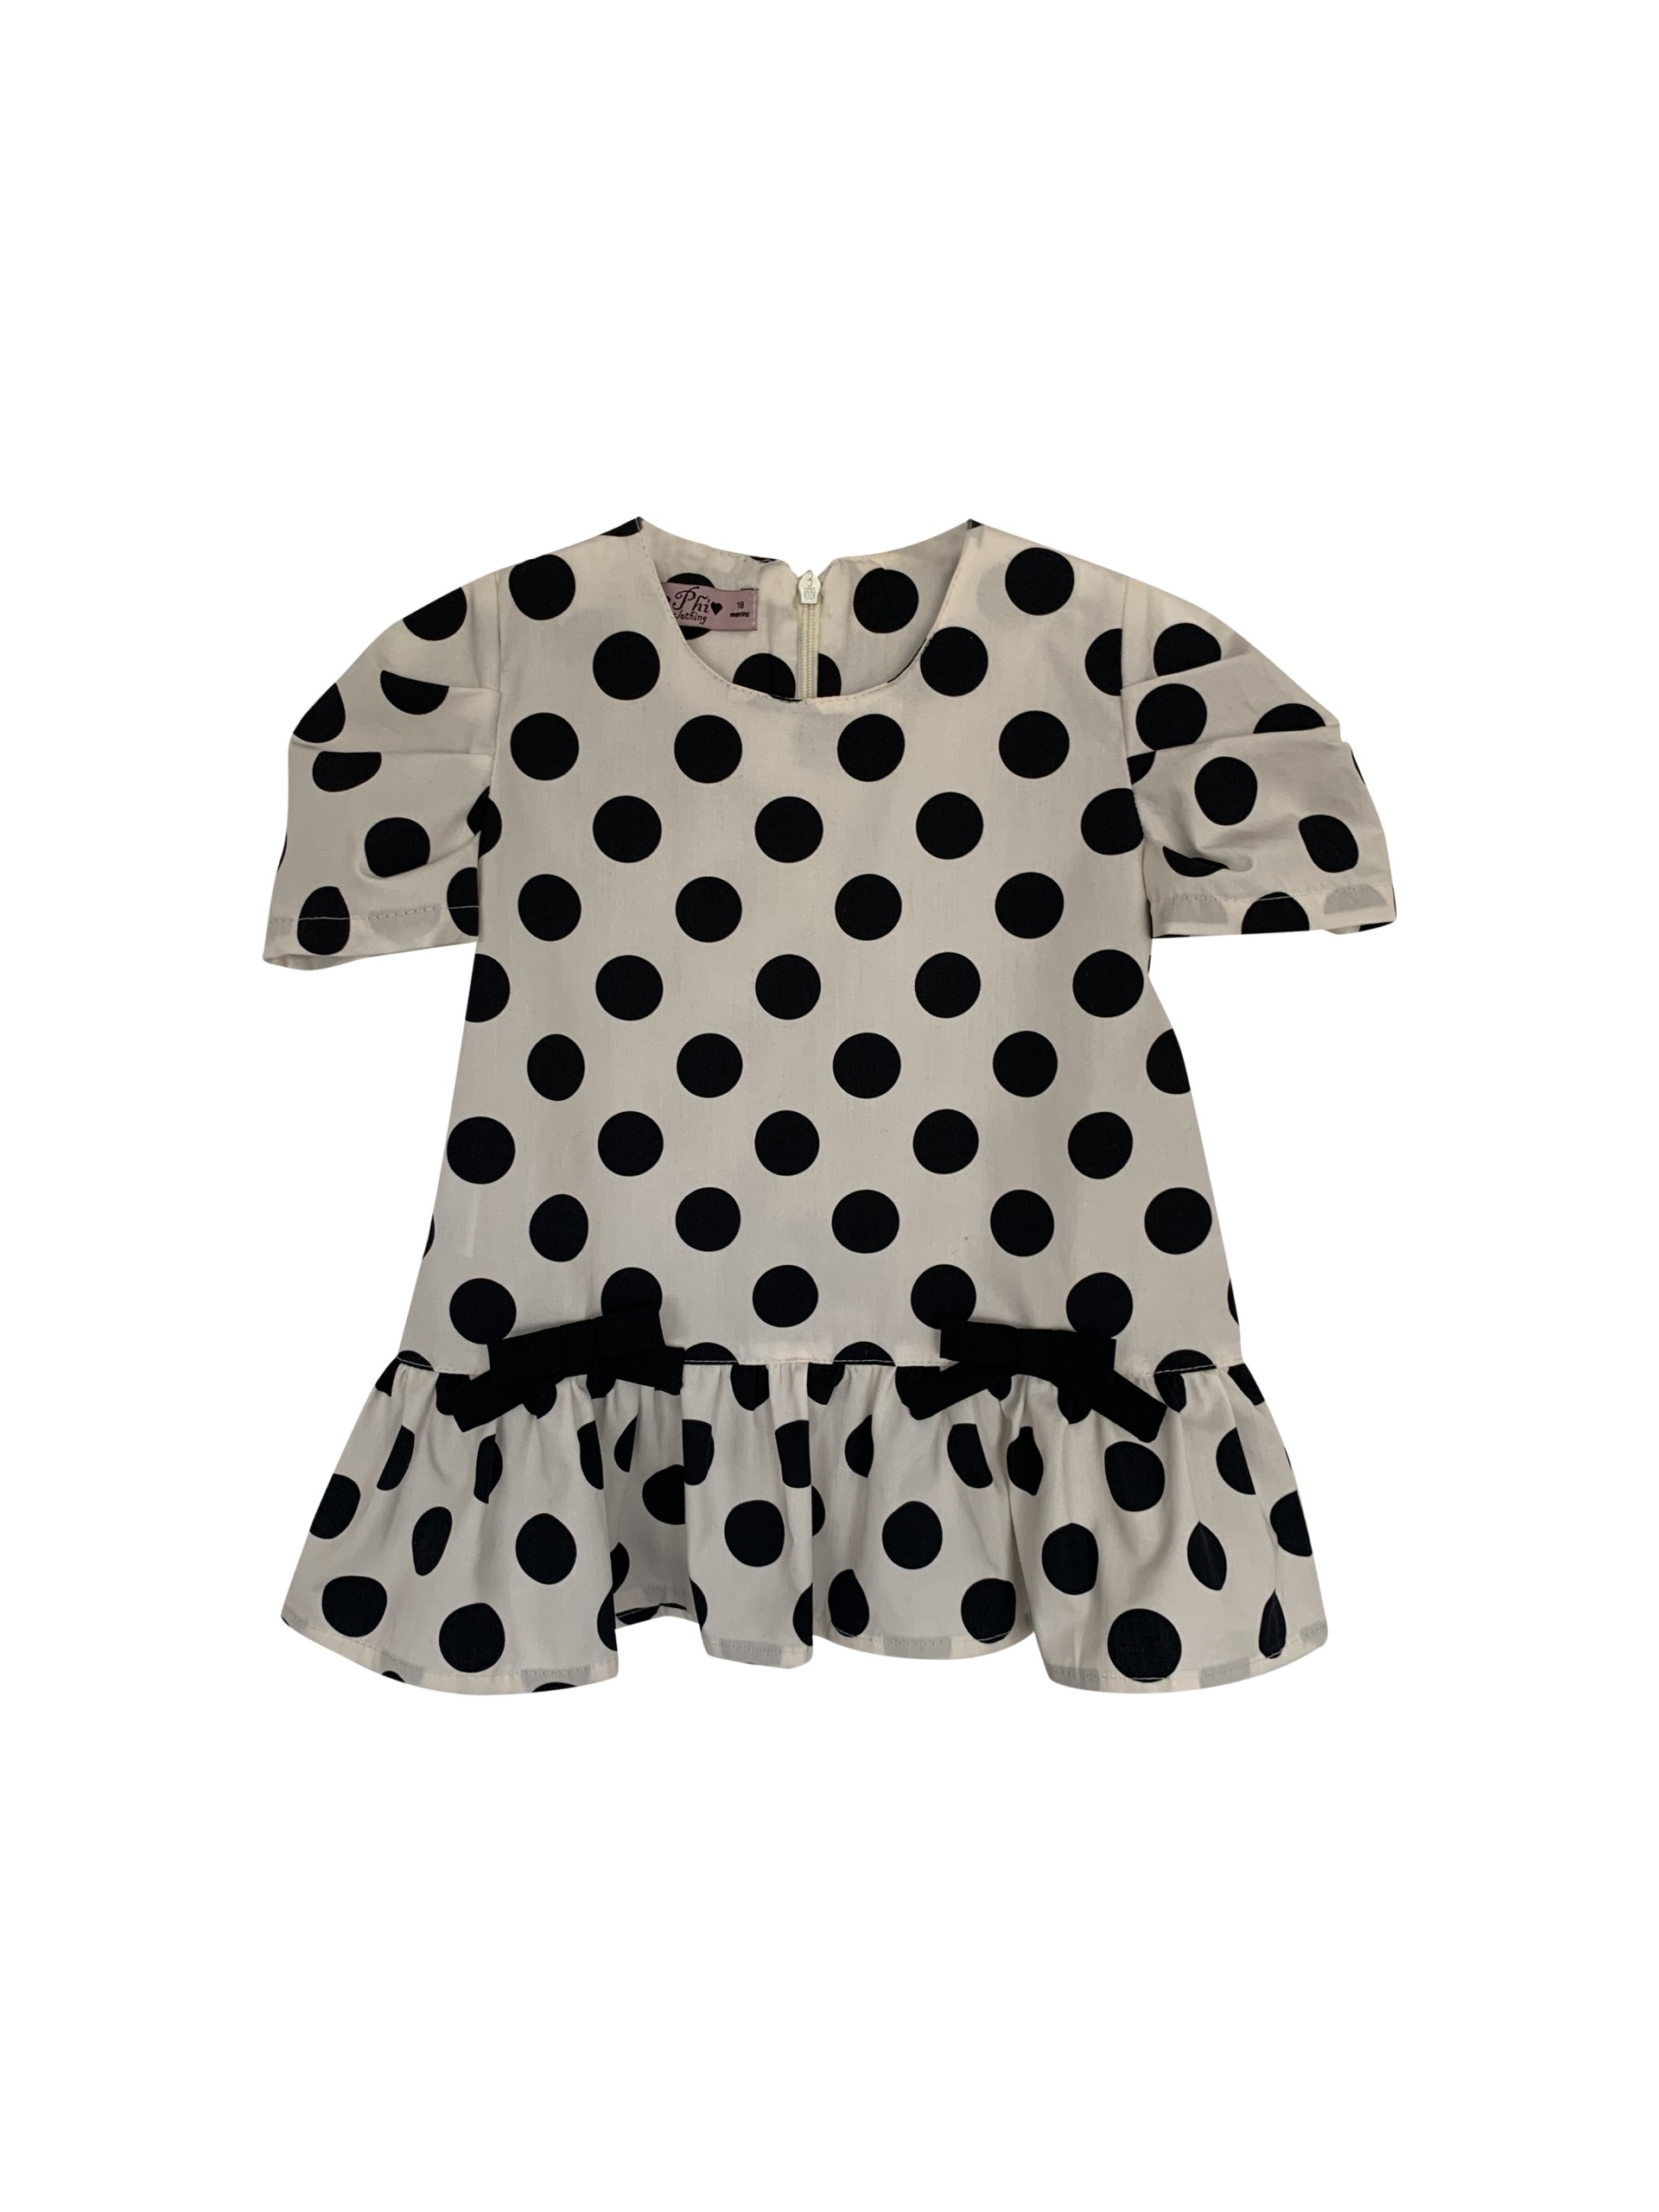 Ivory with black dots frill dress